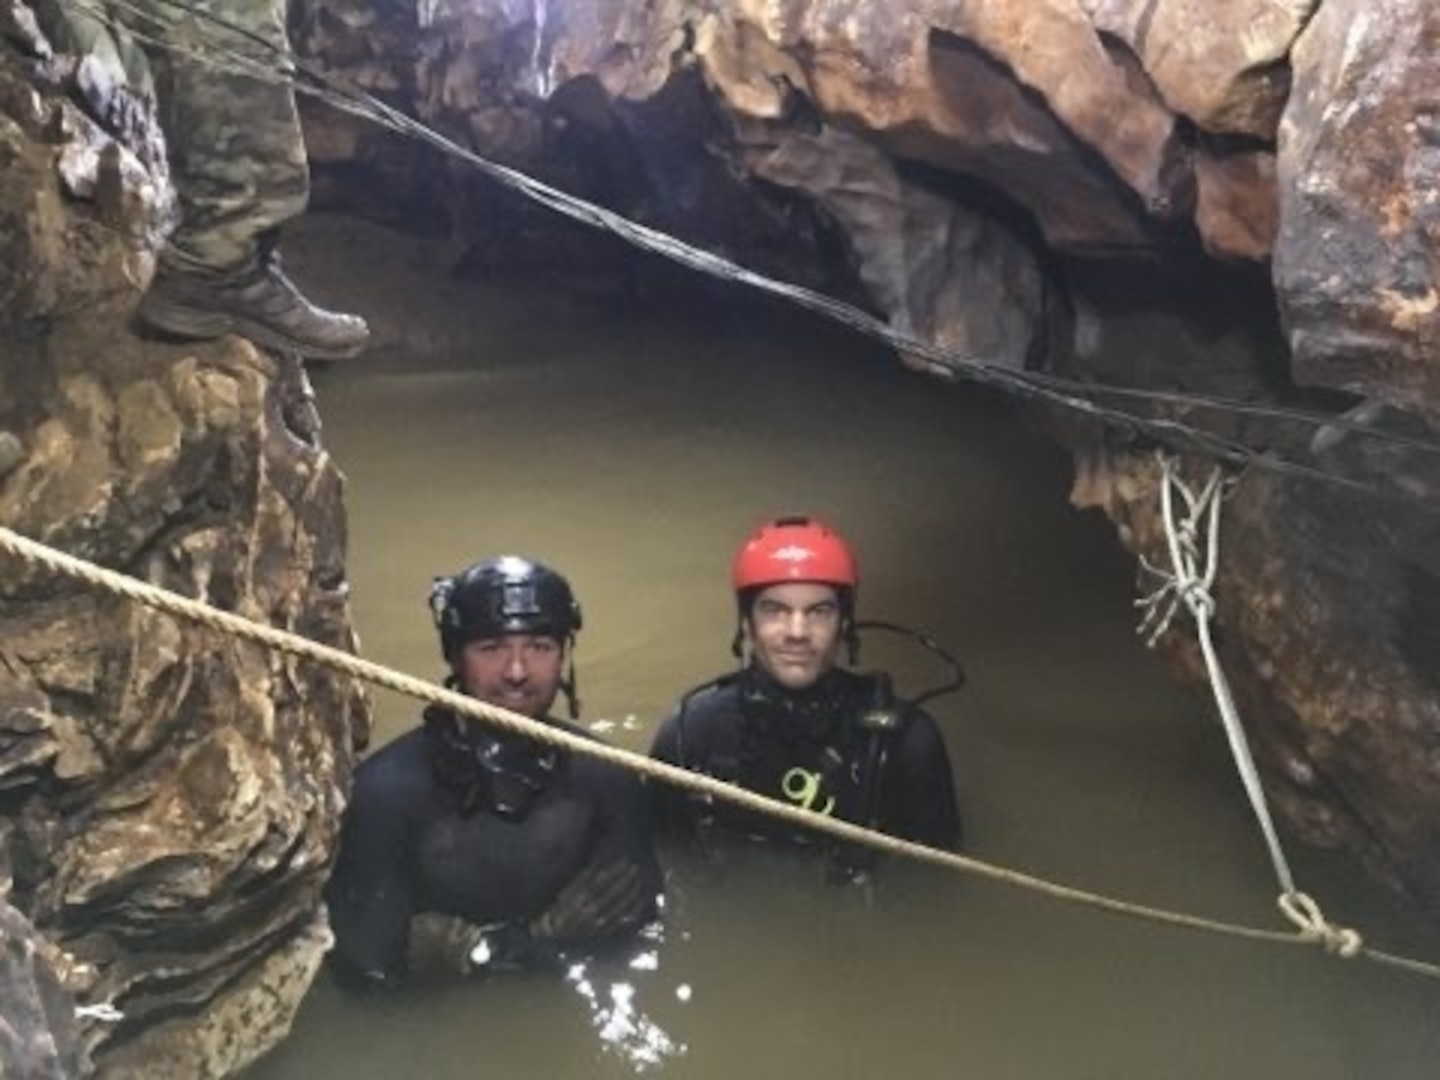 Tech Sgt Jamie Brisbin (right, red helmet) of the 106th Rescue Wing's 103rd Rescue Squadron who took part as a diver in the 2018 Thai Cave rescue pictured here with Tech. Sgt. John Merchand.